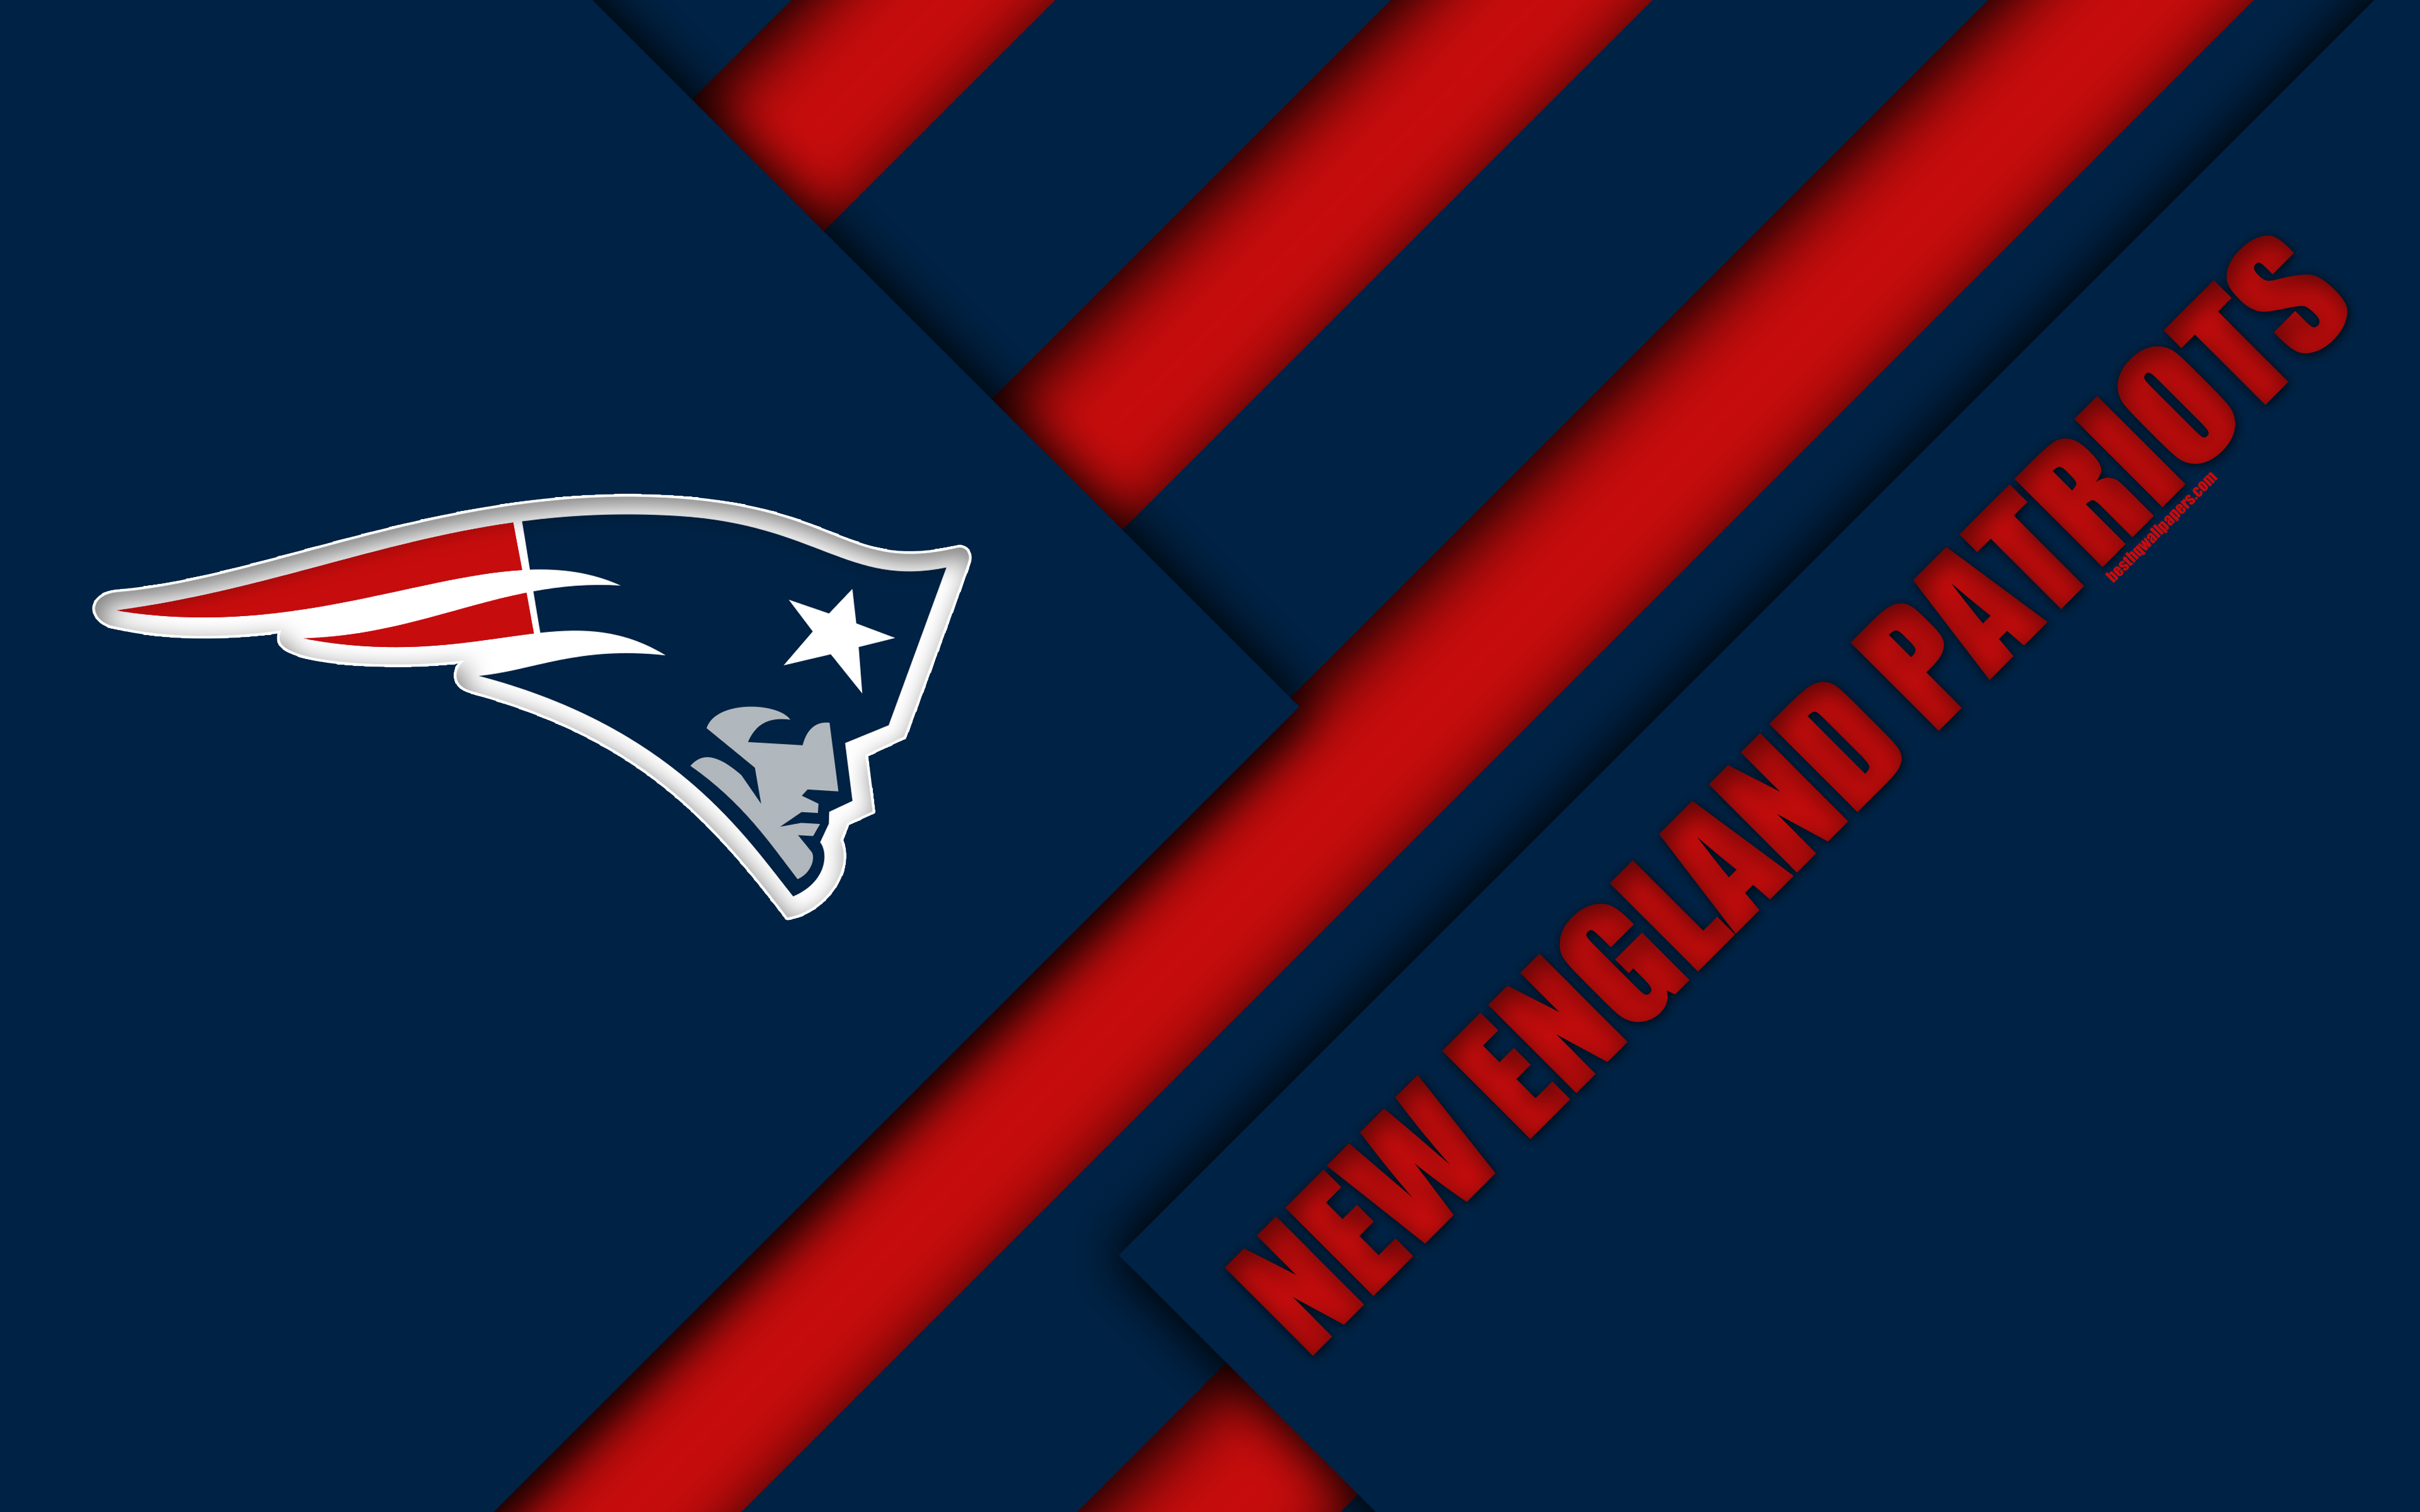 Download wallpaper New England Patriots, 4k, logo, NFL, blue red abstraction, AFC East, material design, American football, New England, USA, National Football League for desktop with resolution 3840x2400. High Quality HD picture